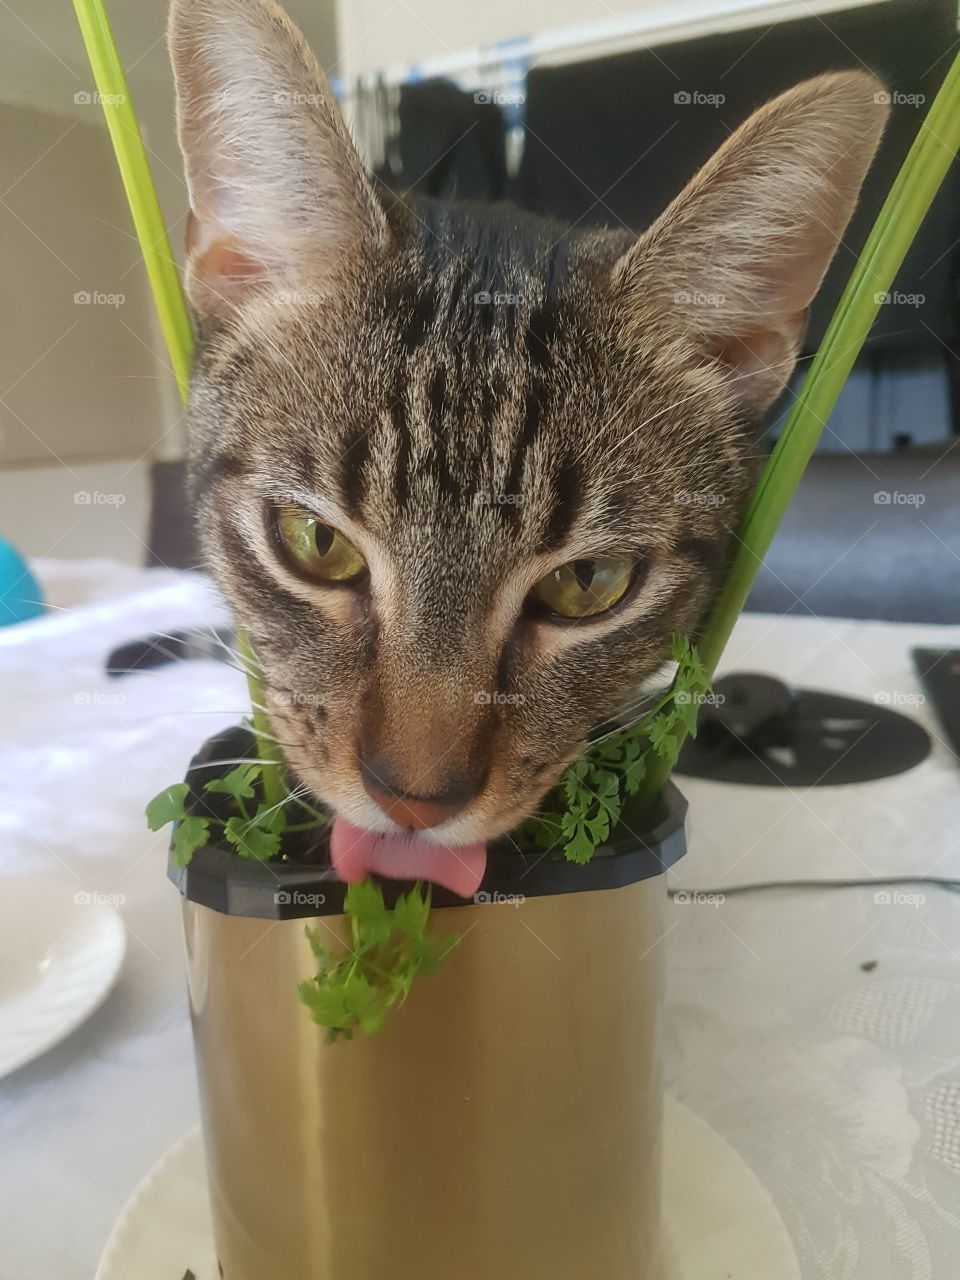 He loves his herbs